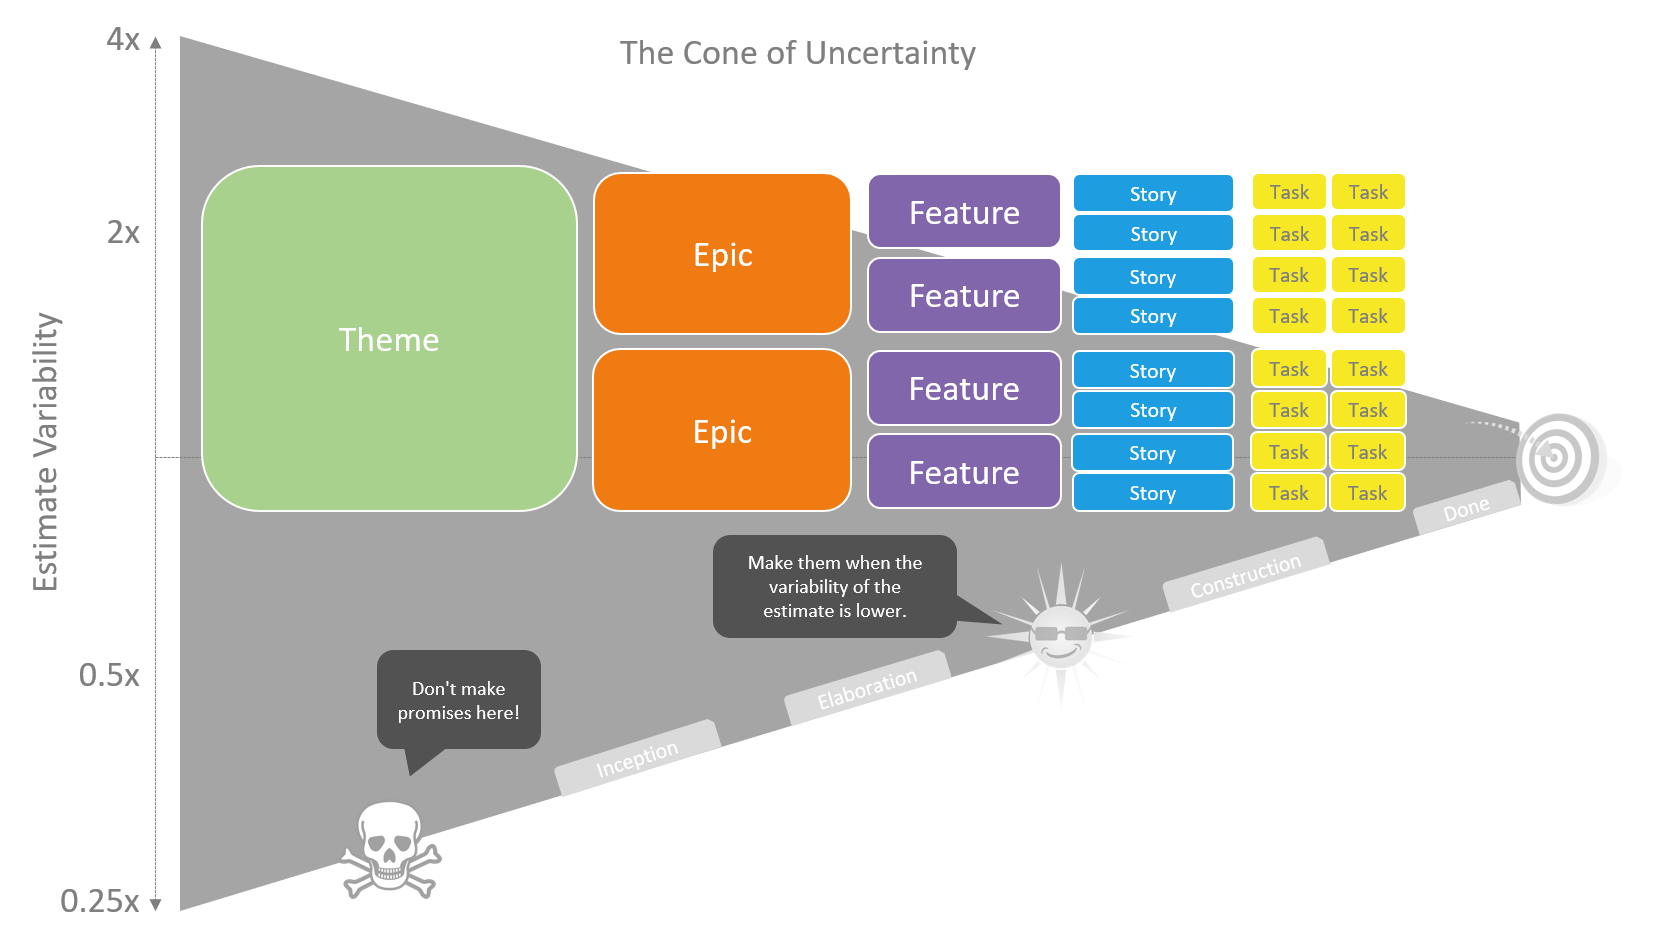 The Cone of Uncertainty (Source: https://almbok.com/kb/cone_of_uncertainty)